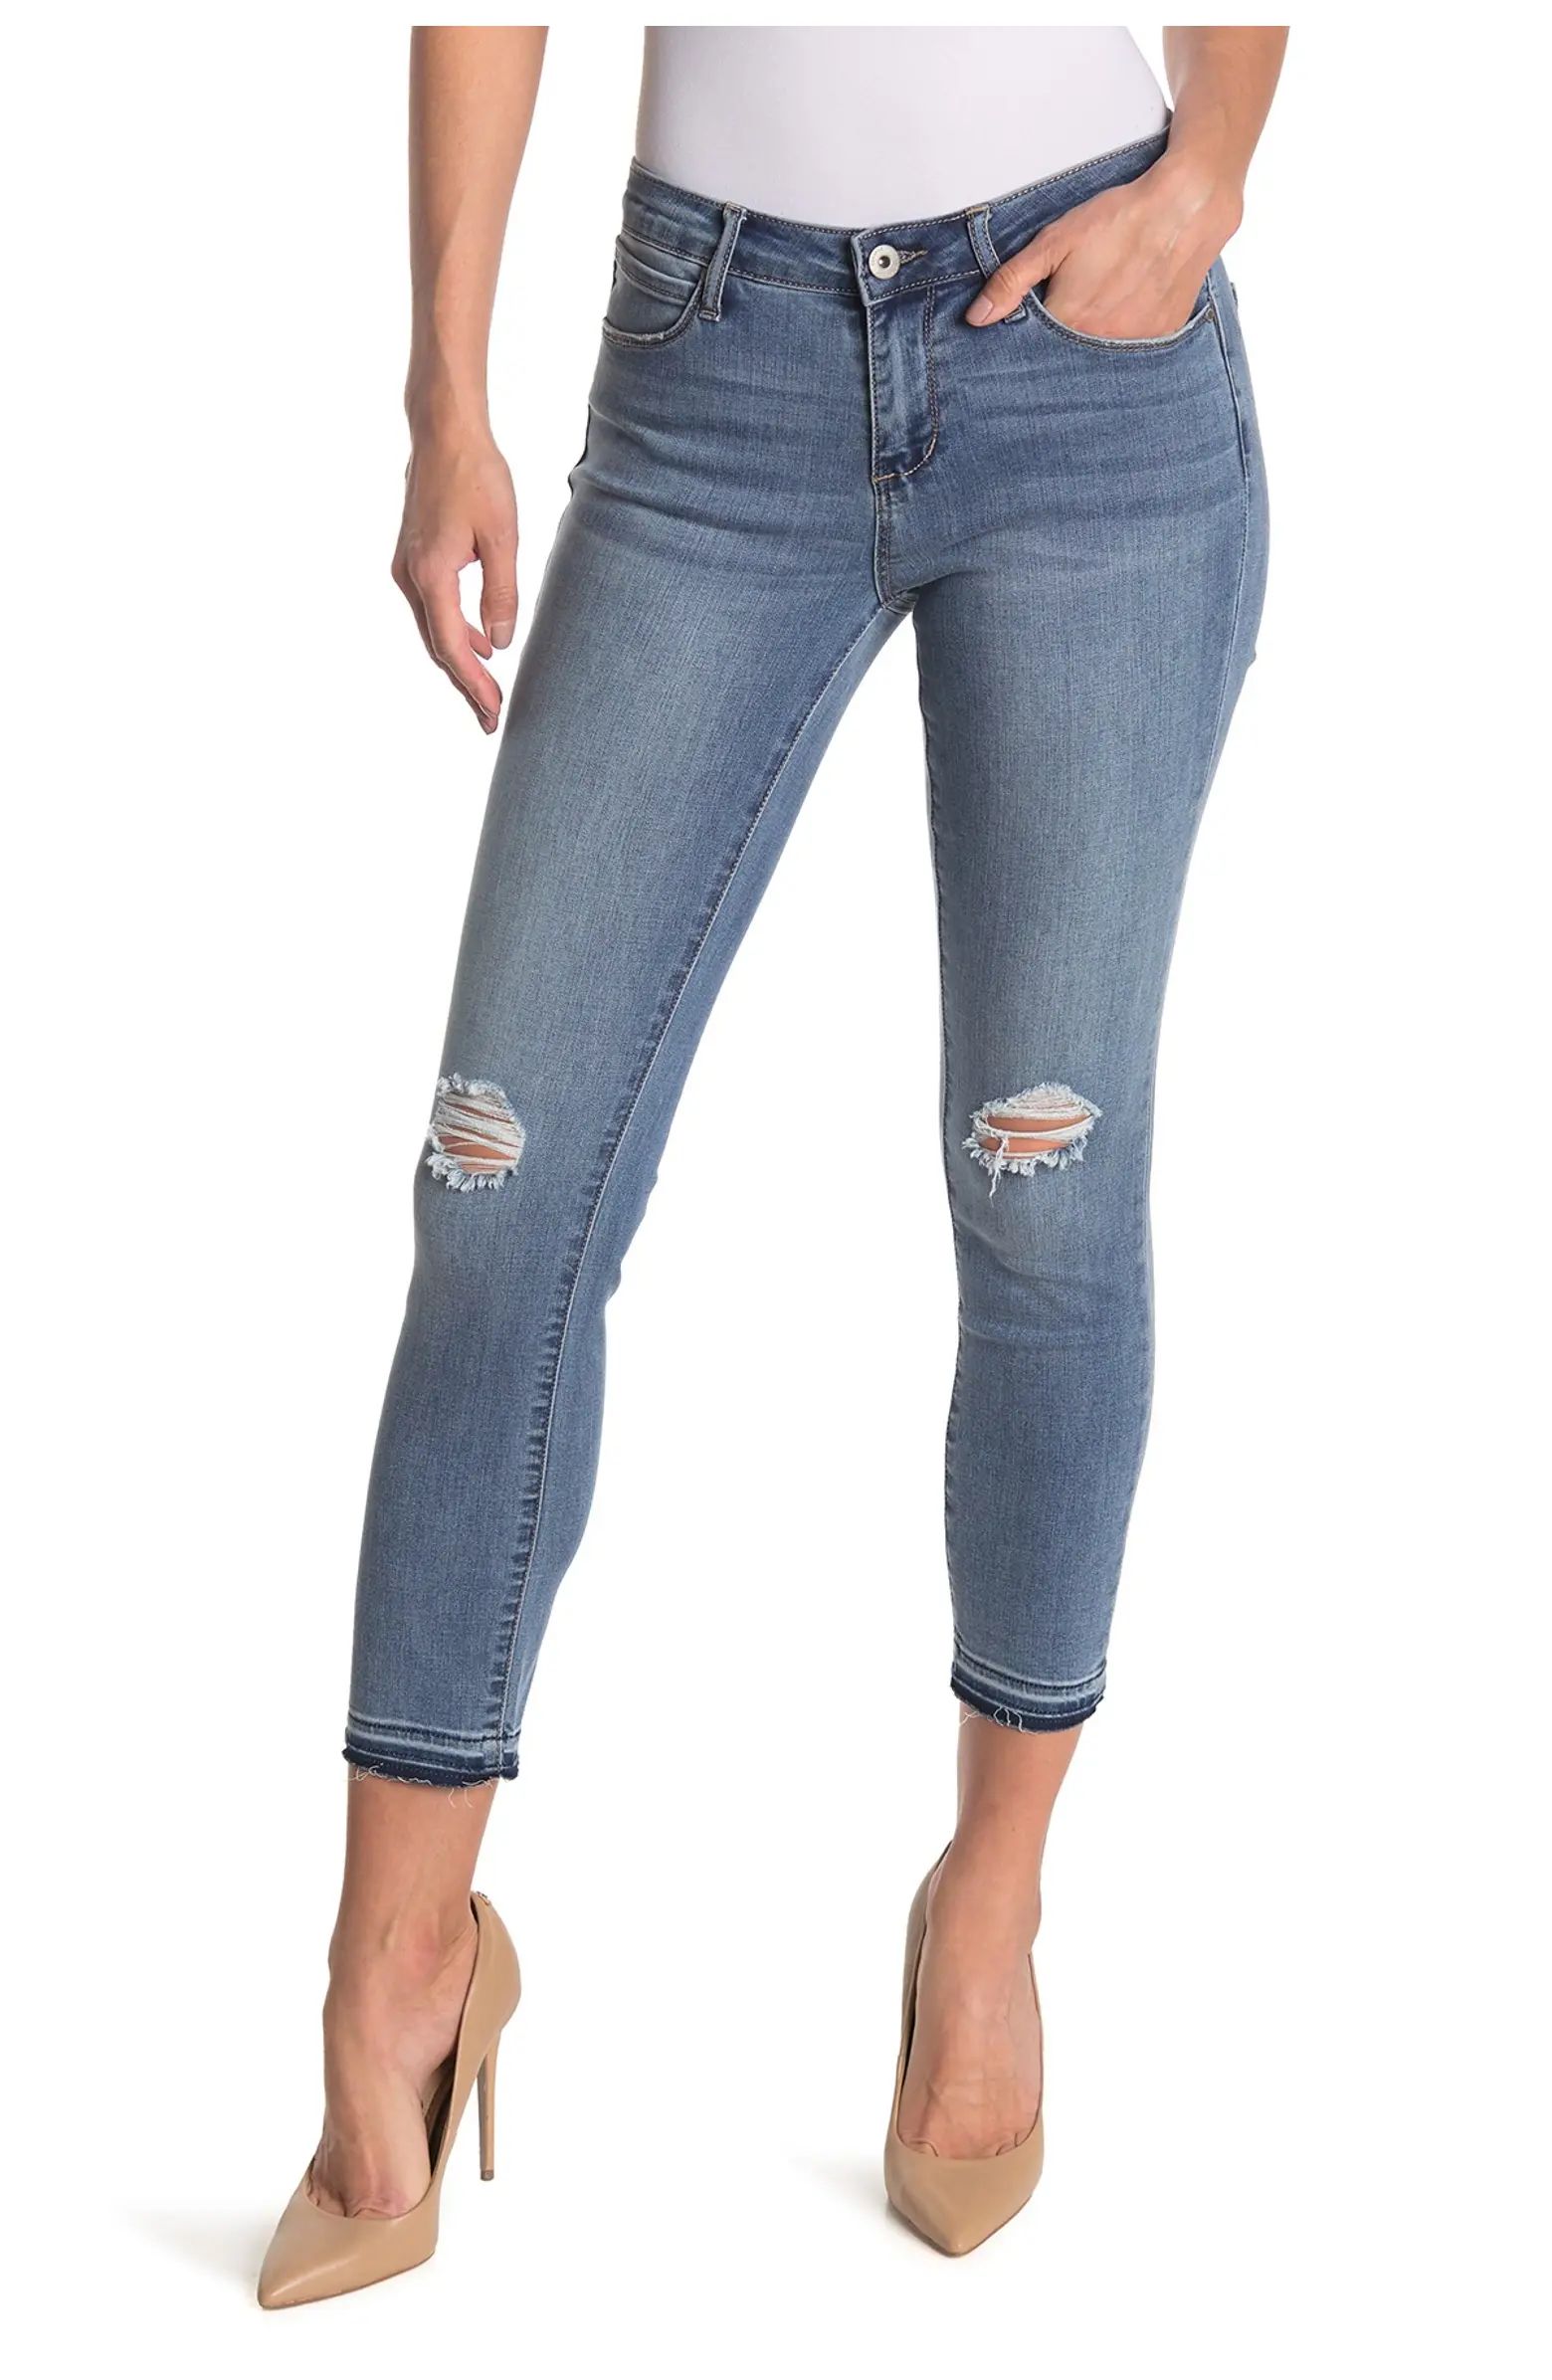 ARTICLES OF SOCIETY Carly Cropped Jean | Nordstromrack | Nordstrom Rack